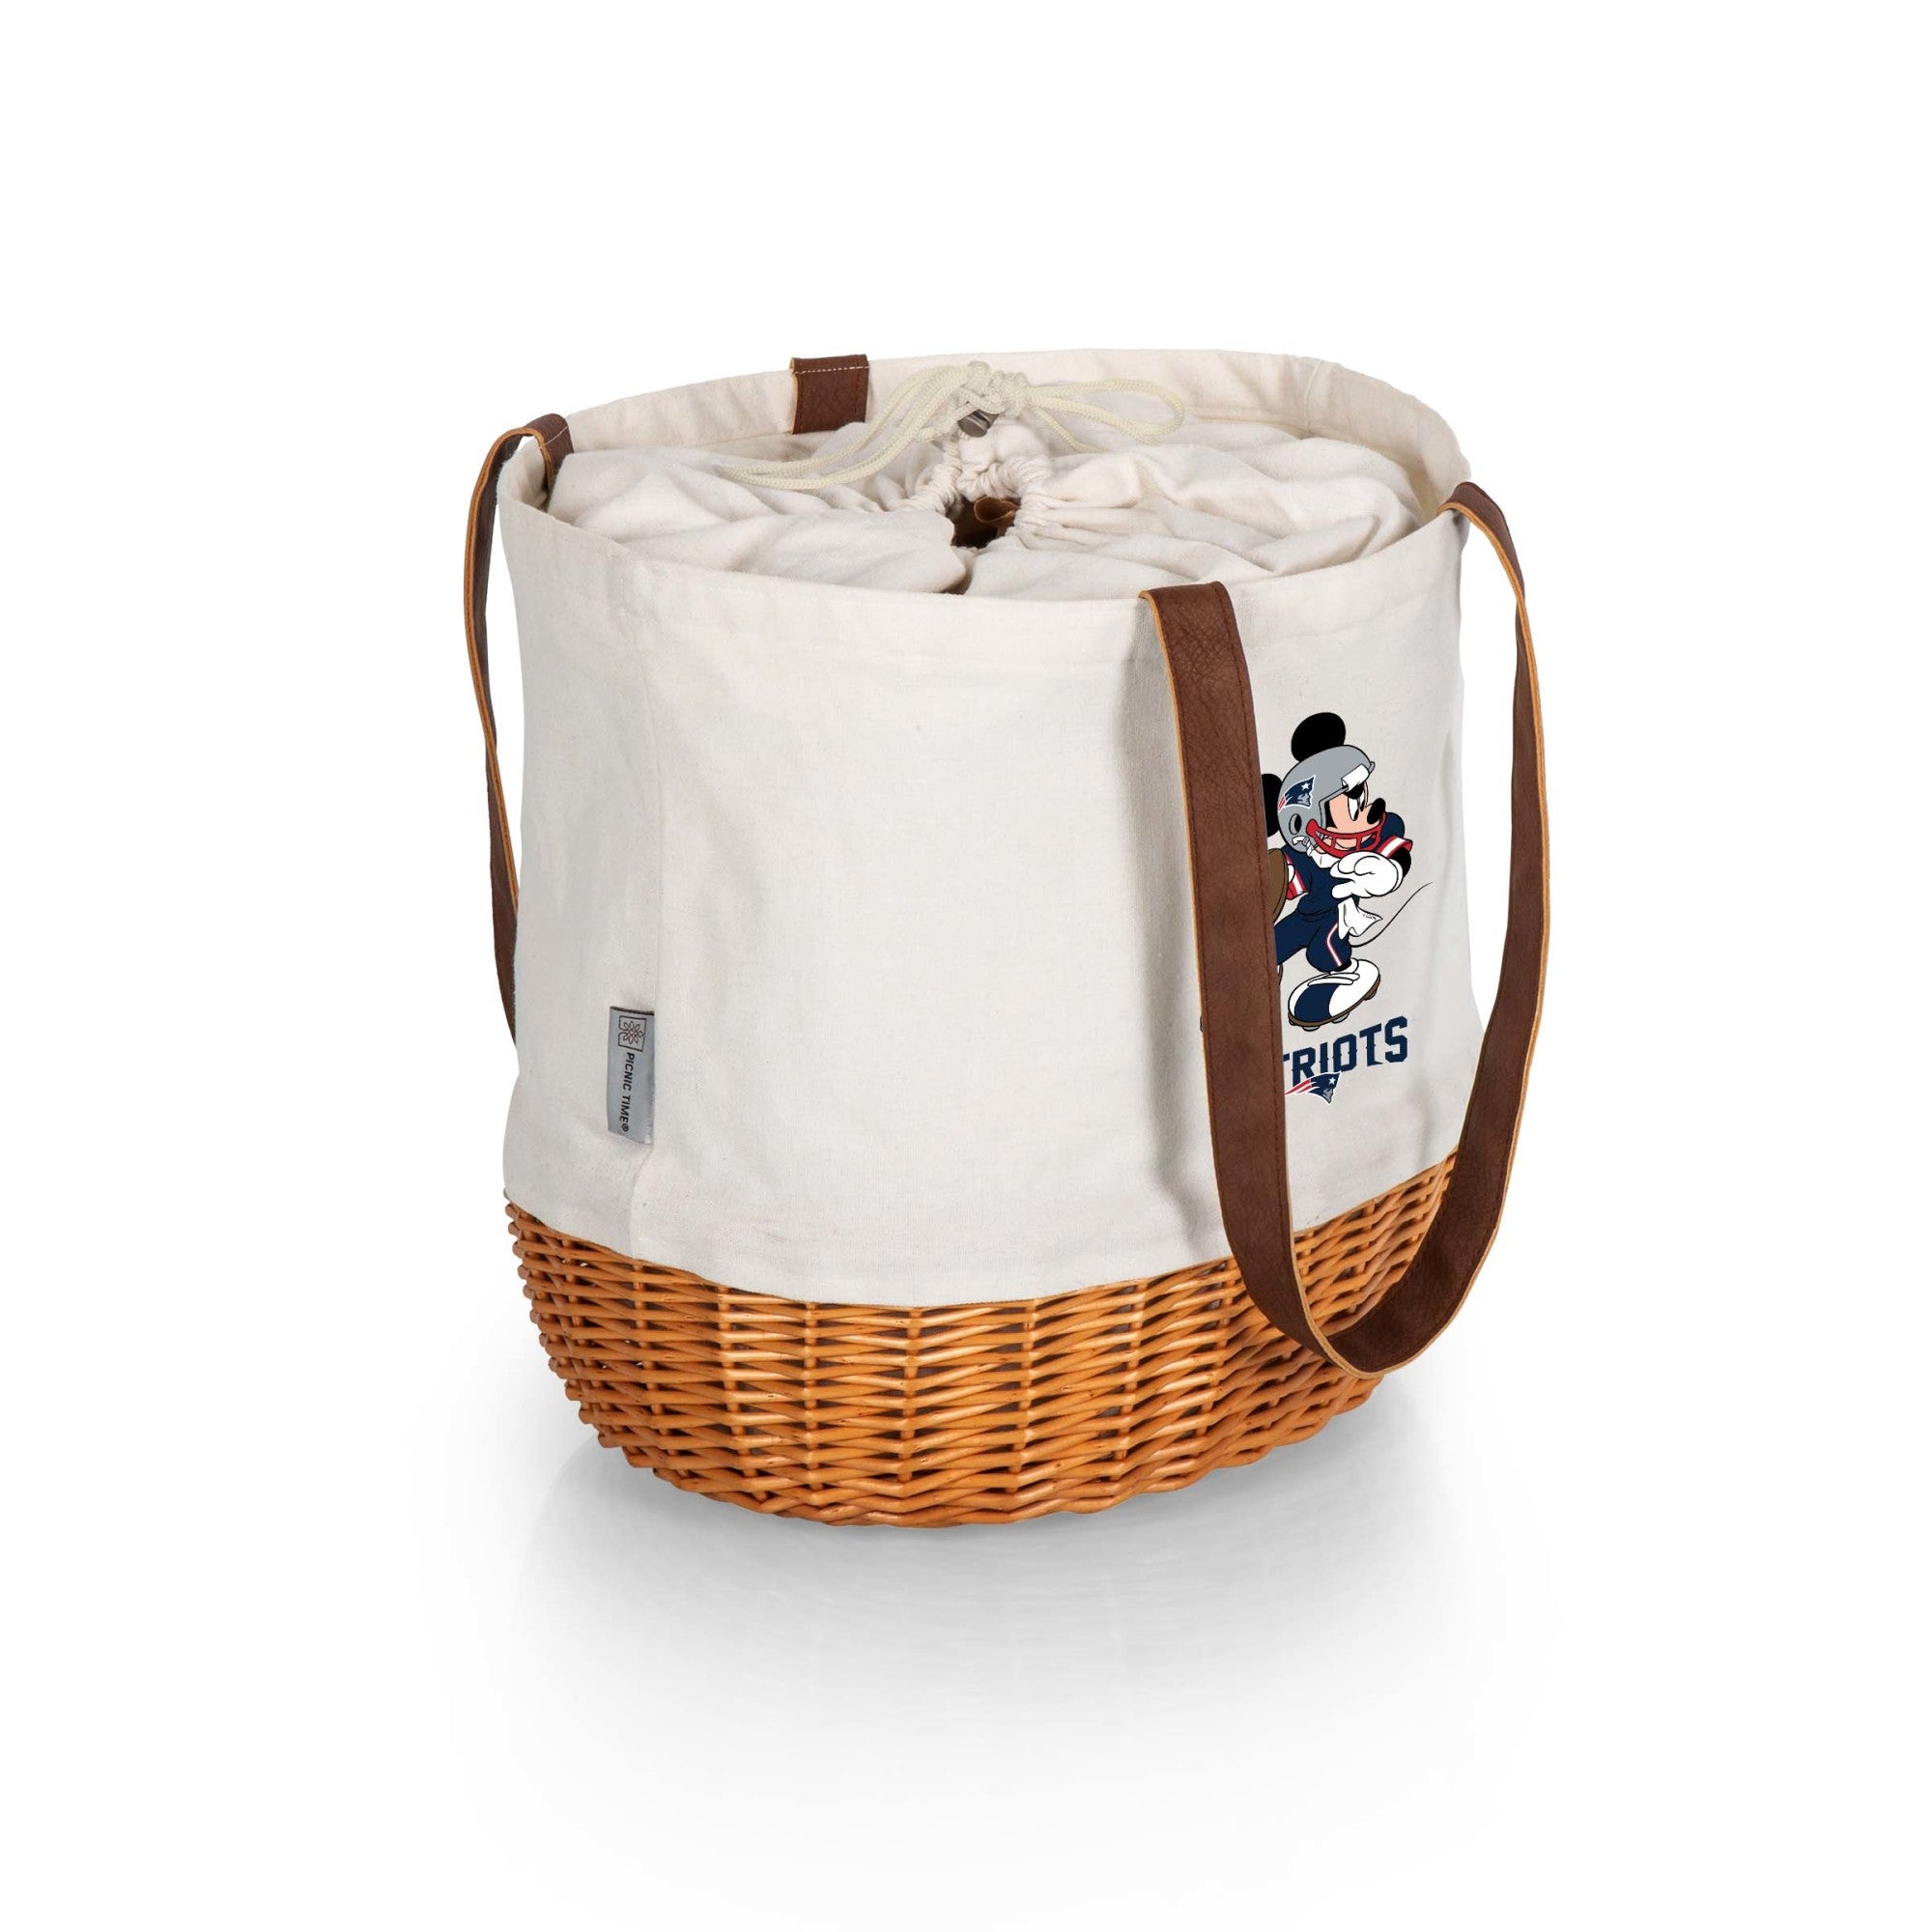 Mickey Mouse - New England Patriots - Coronado Canvas and Willow Basket Tote